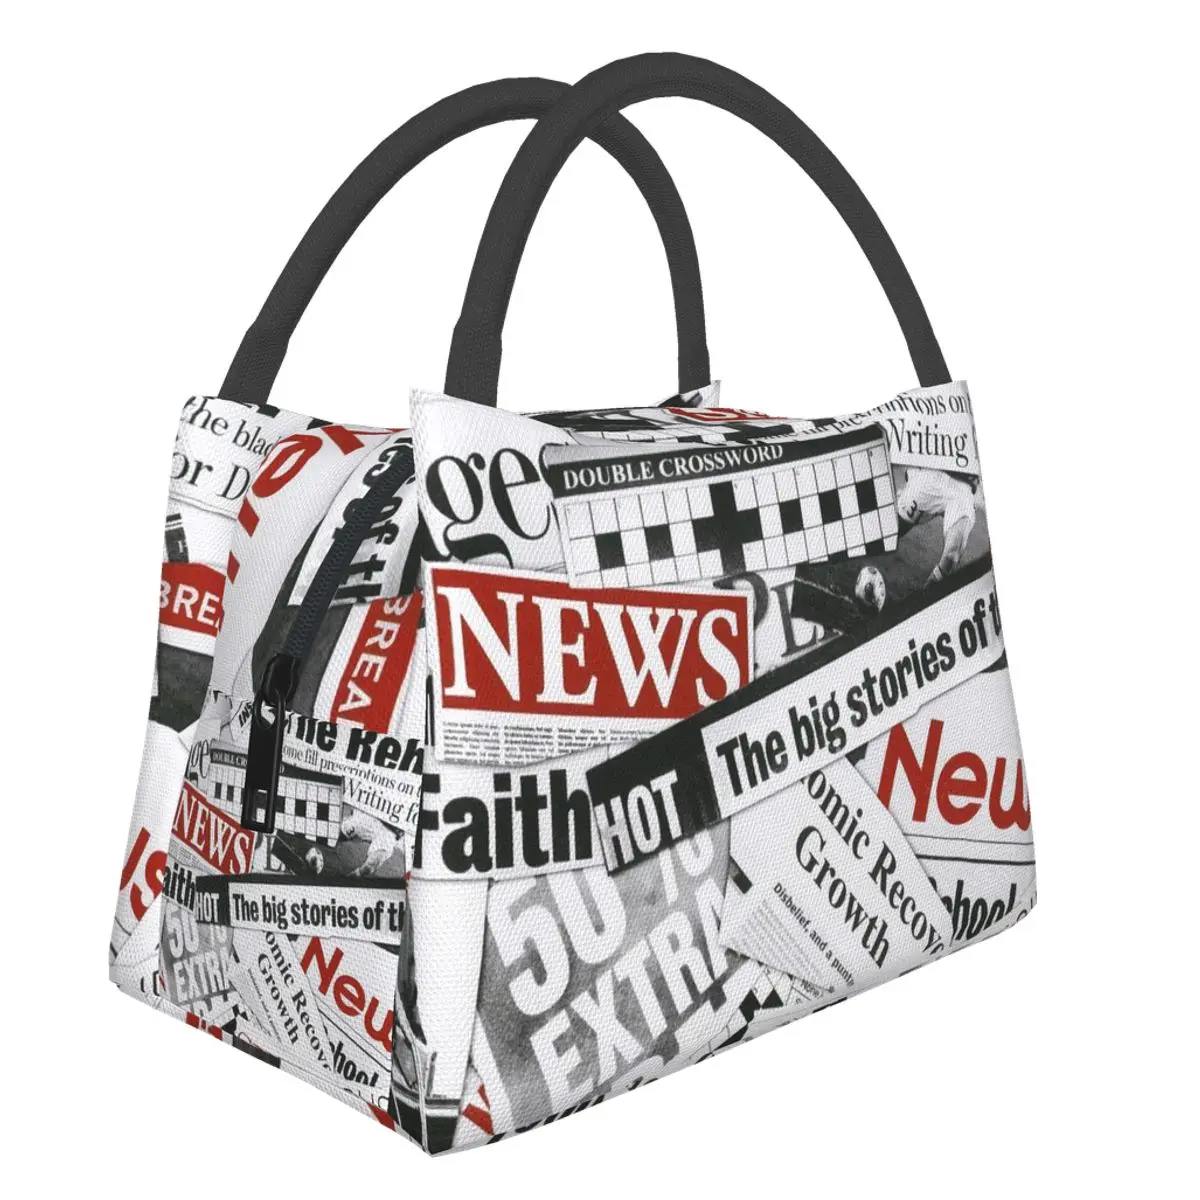 Portable Lunch Bag Newspaper Pattern Print Thermal Insulated Lunch Box Tote Cooler Handbag Bento Dinner Container School Storage portable lunch bag thermal insulated lunch box tote cooler handbag bento pouch dinner container travel school food storage bags